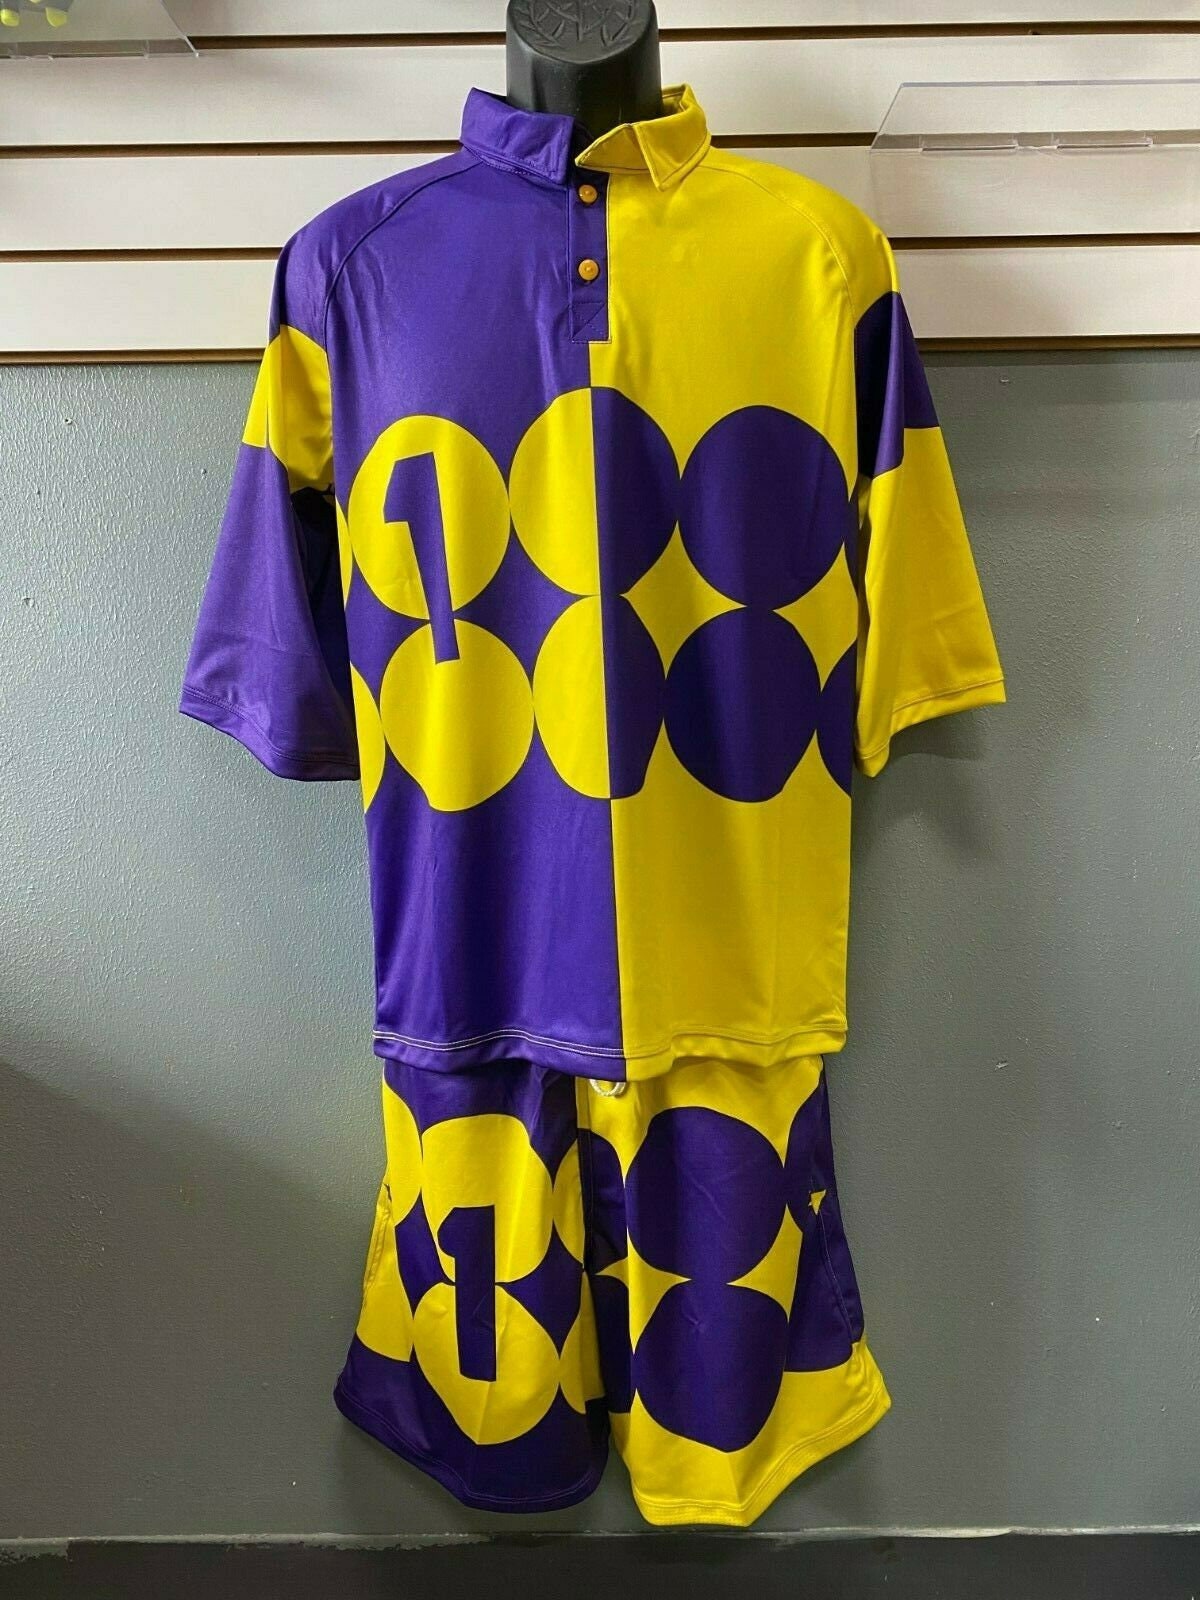 Classic Football Shirts has reproduced an old Jorge Campos jersey